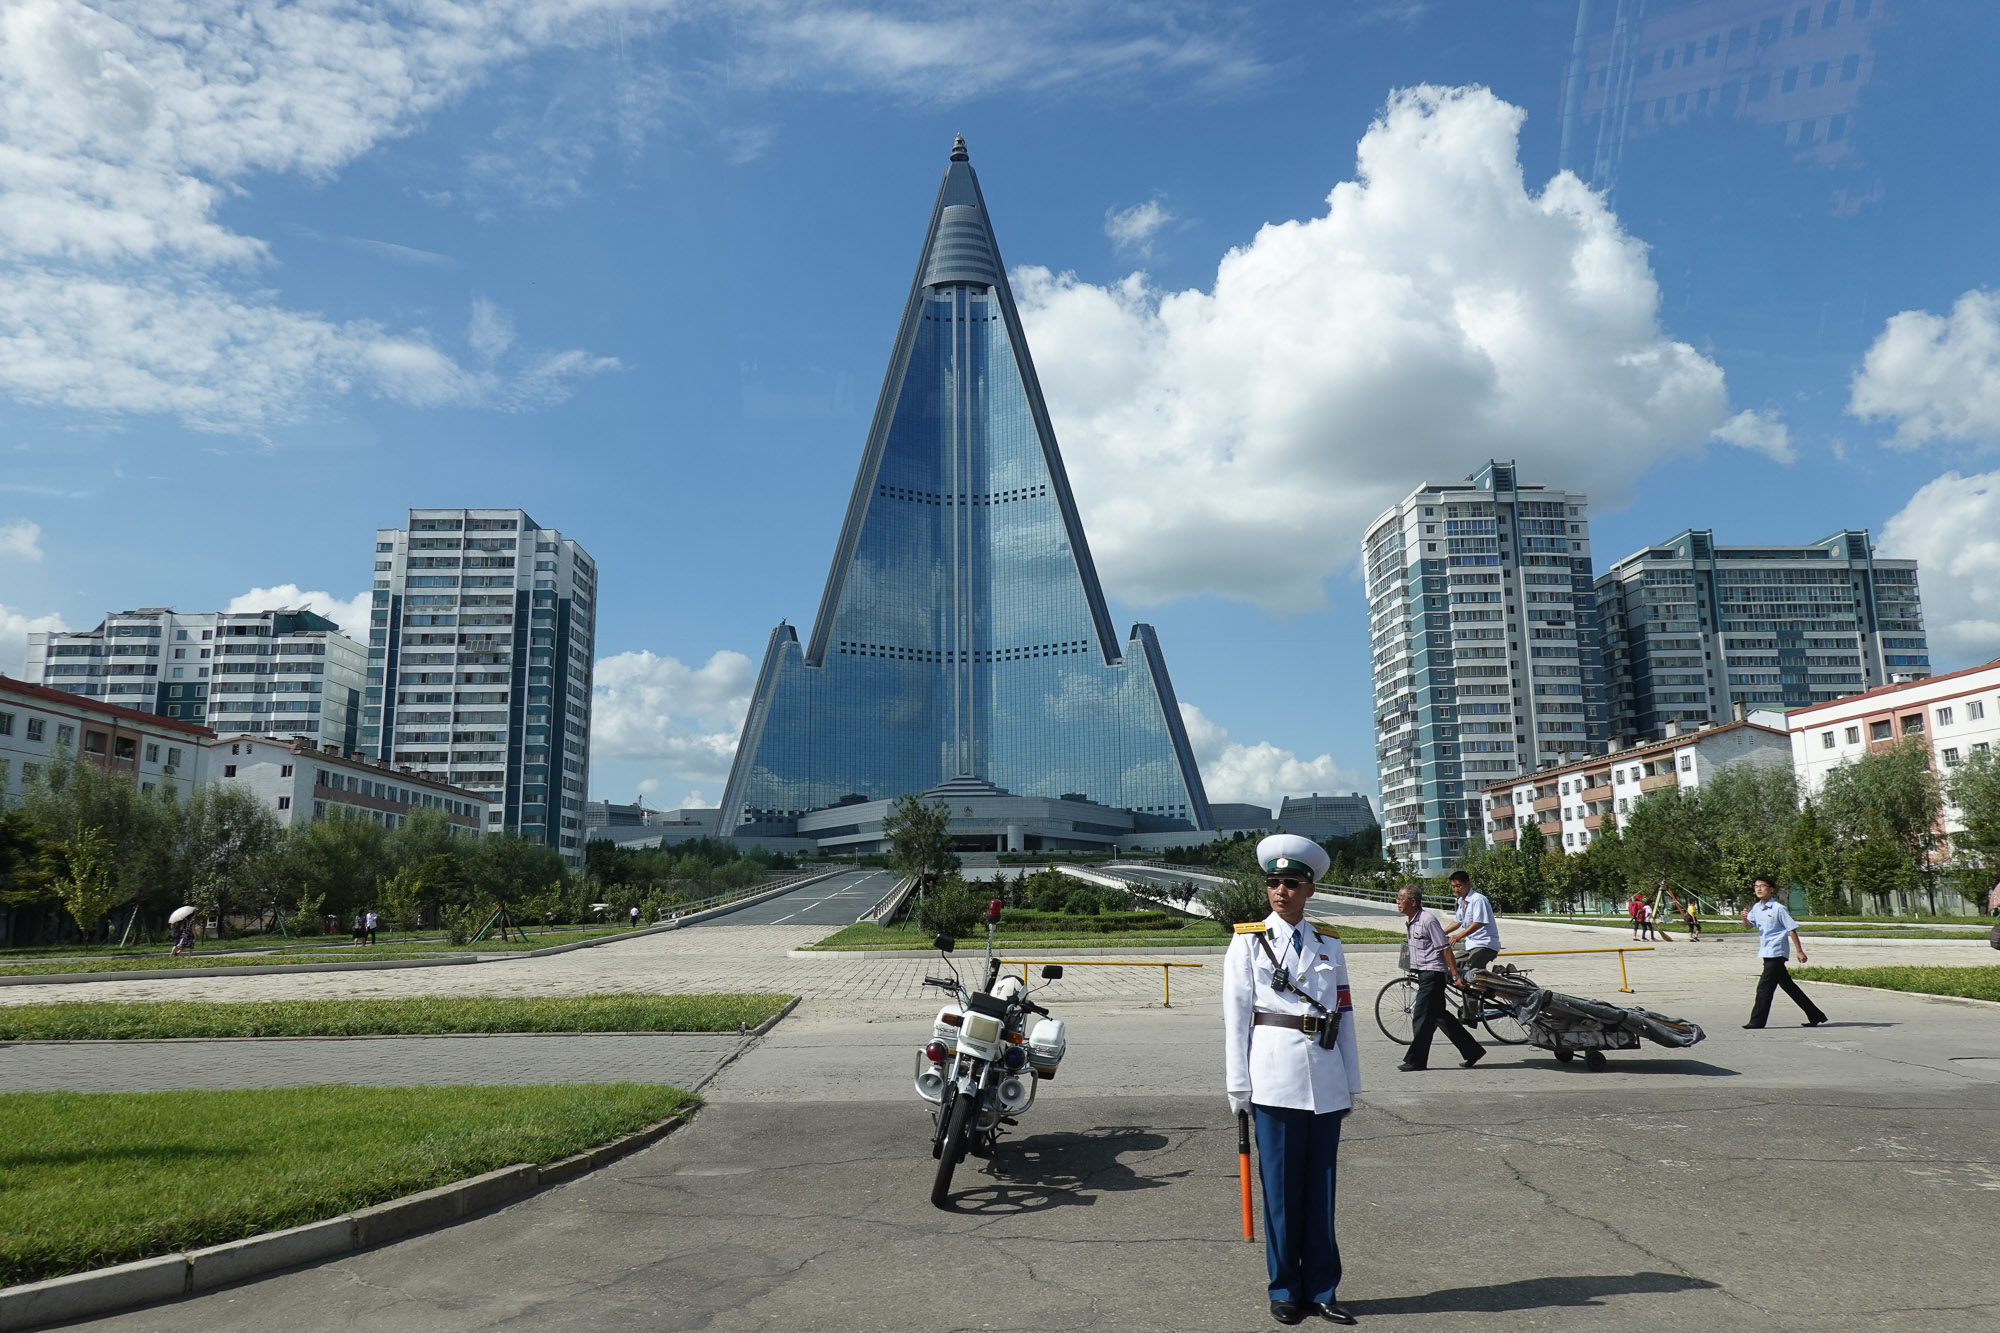 Ryugyong Hotel - North Korea's Tallest Building | Uri Tours